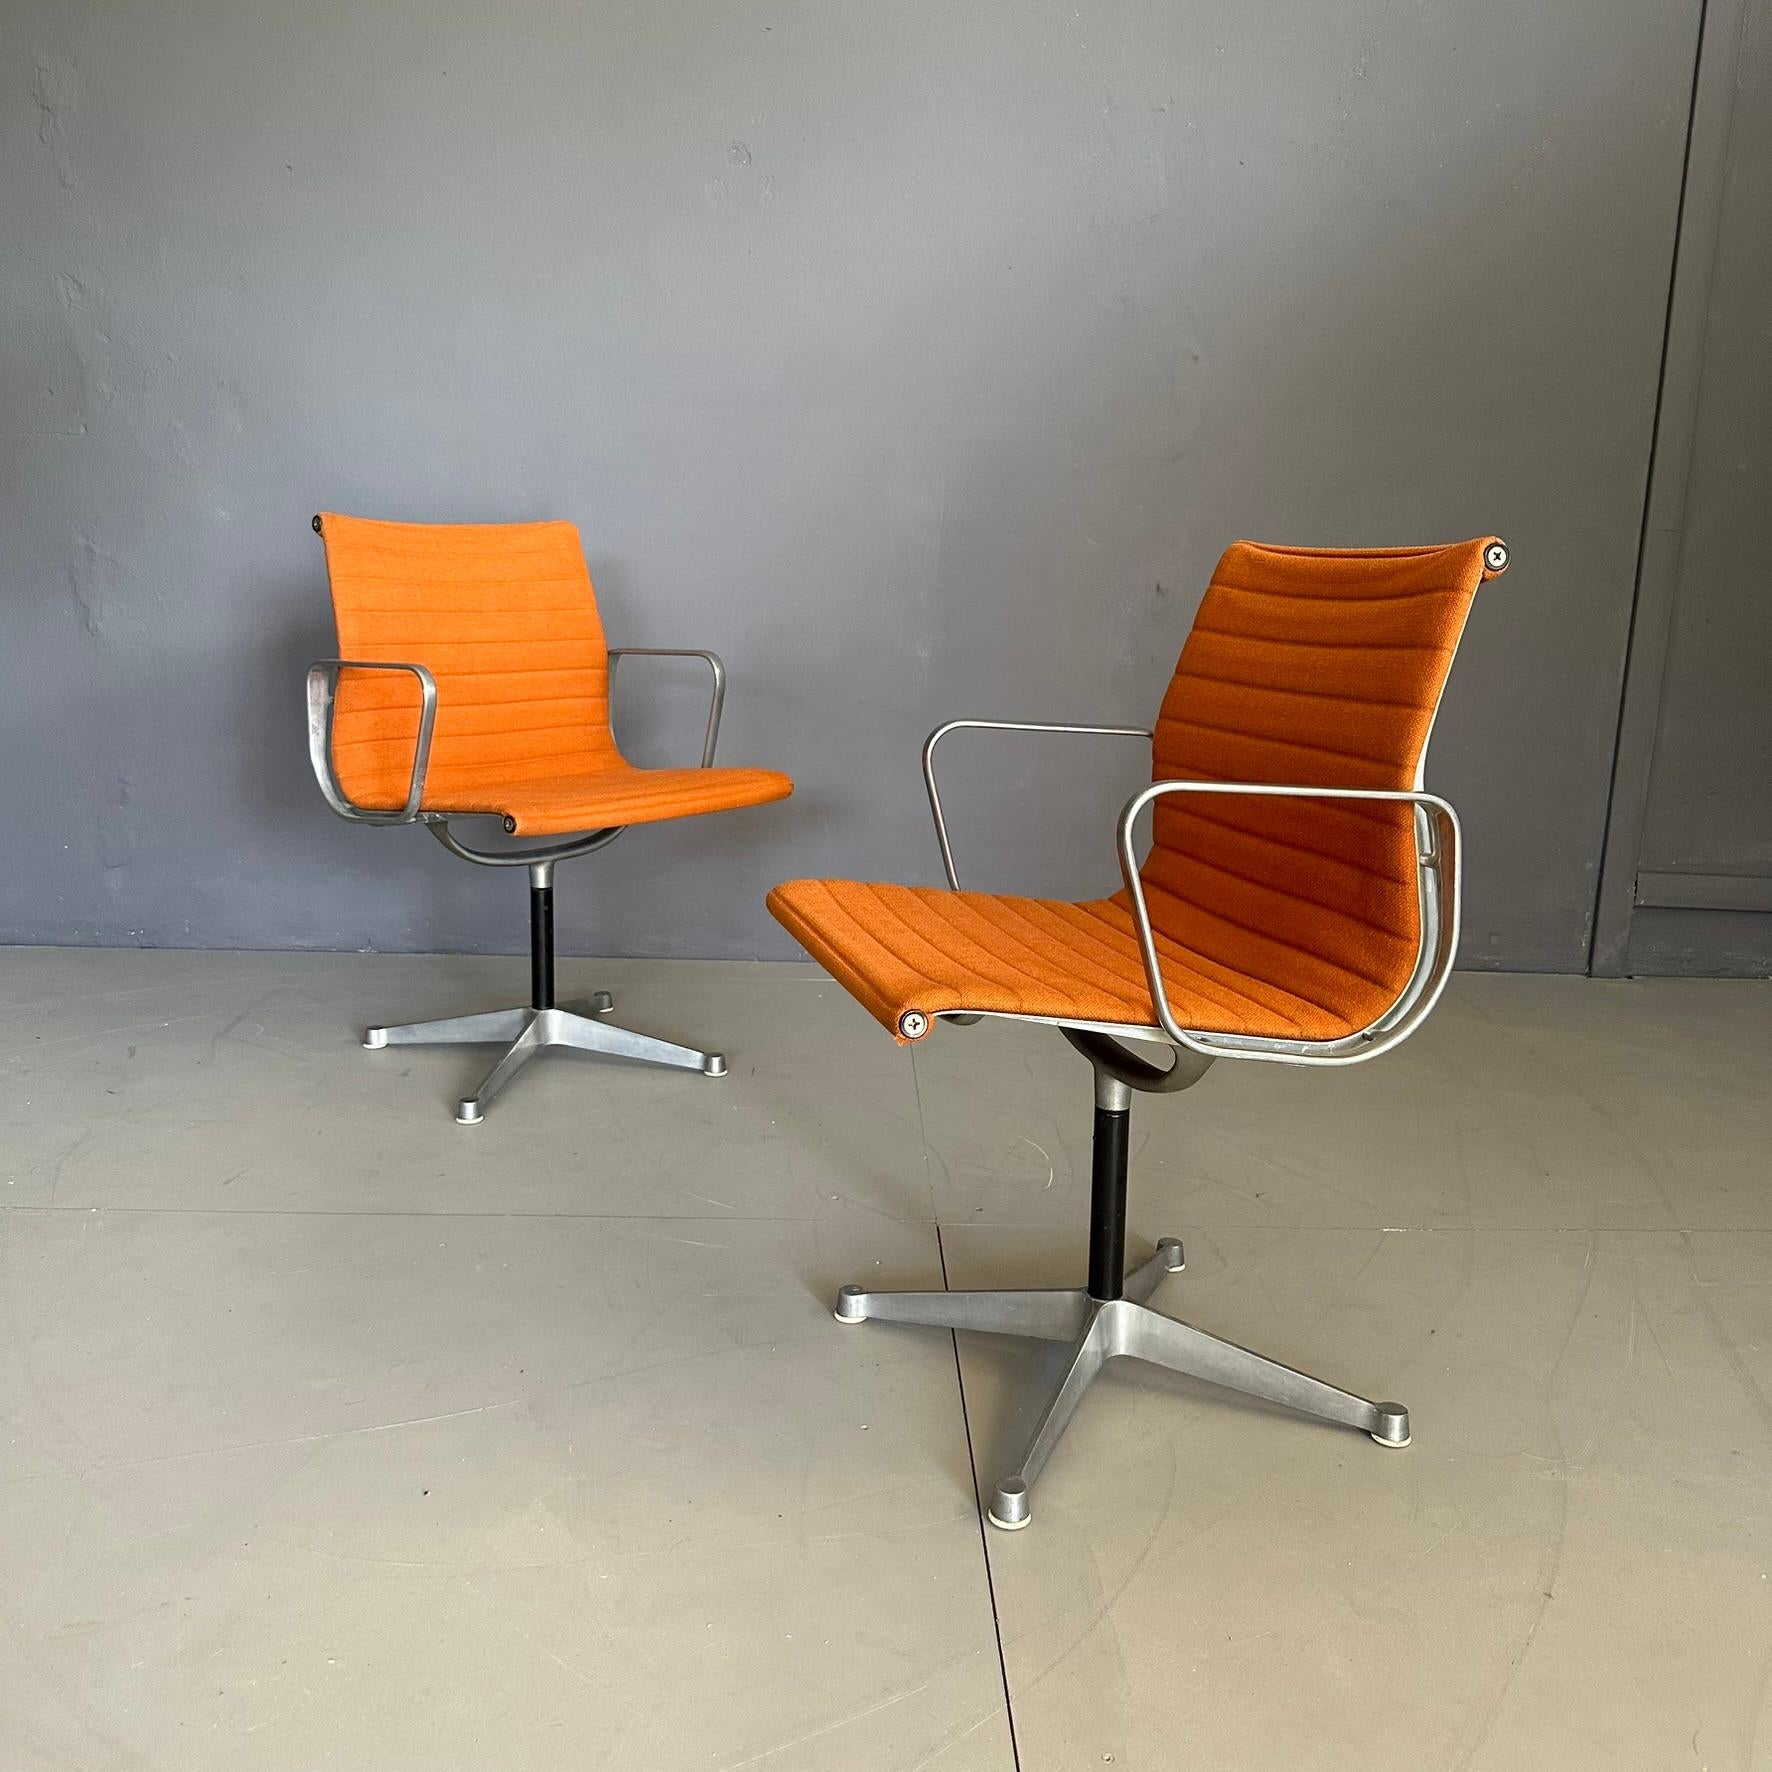 Pair of EA108 armchairs design by Charles Eames for Herman Miller, 1960s, with swivel seat.
Aluminum structure with four legs, central part in black painted aluminium.
Under the seat there is the serial number and the Herman Miller brand